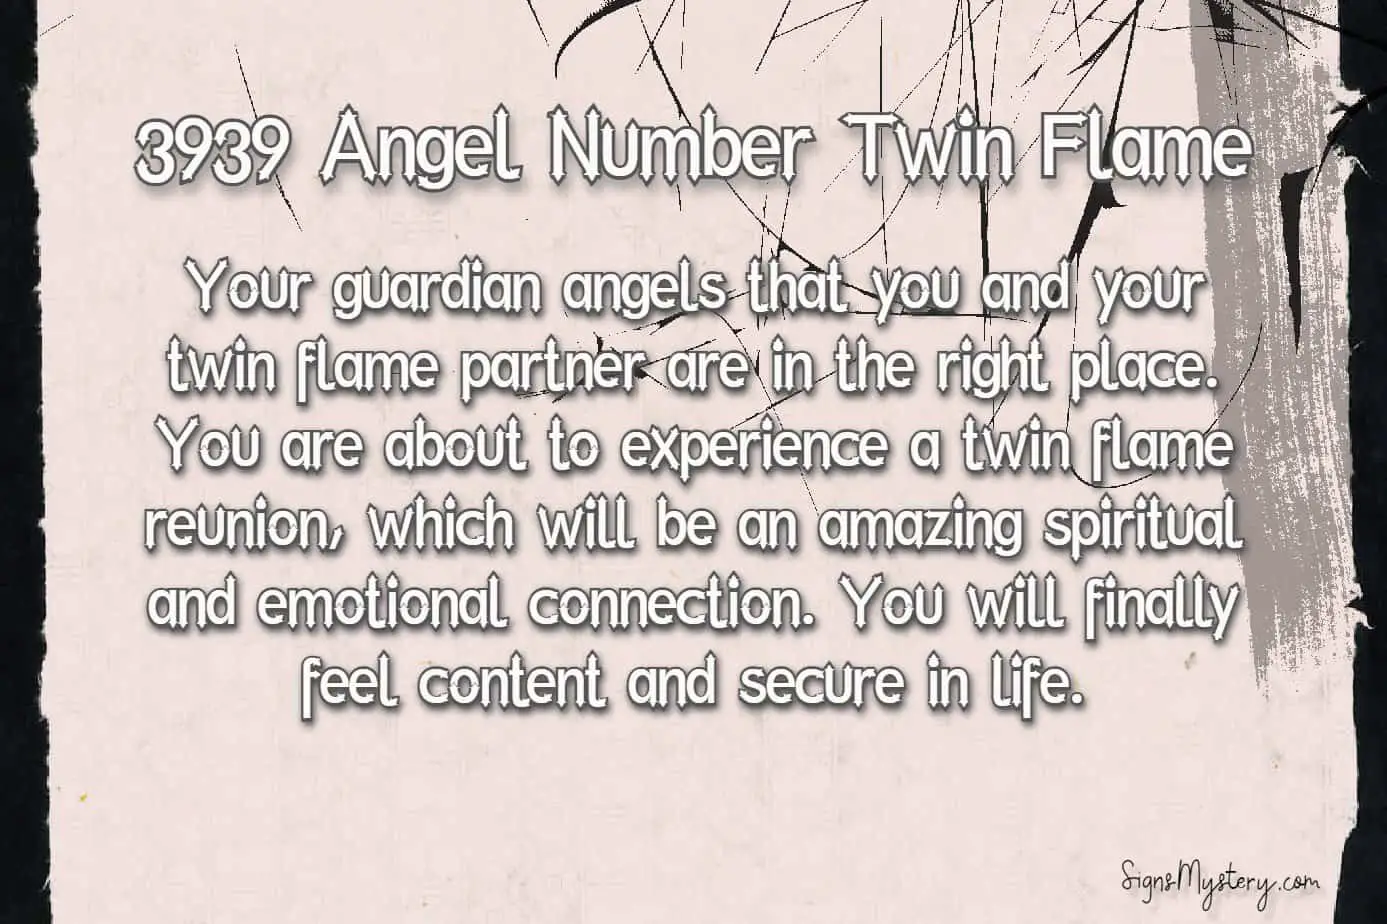 3939 angel number twin flame